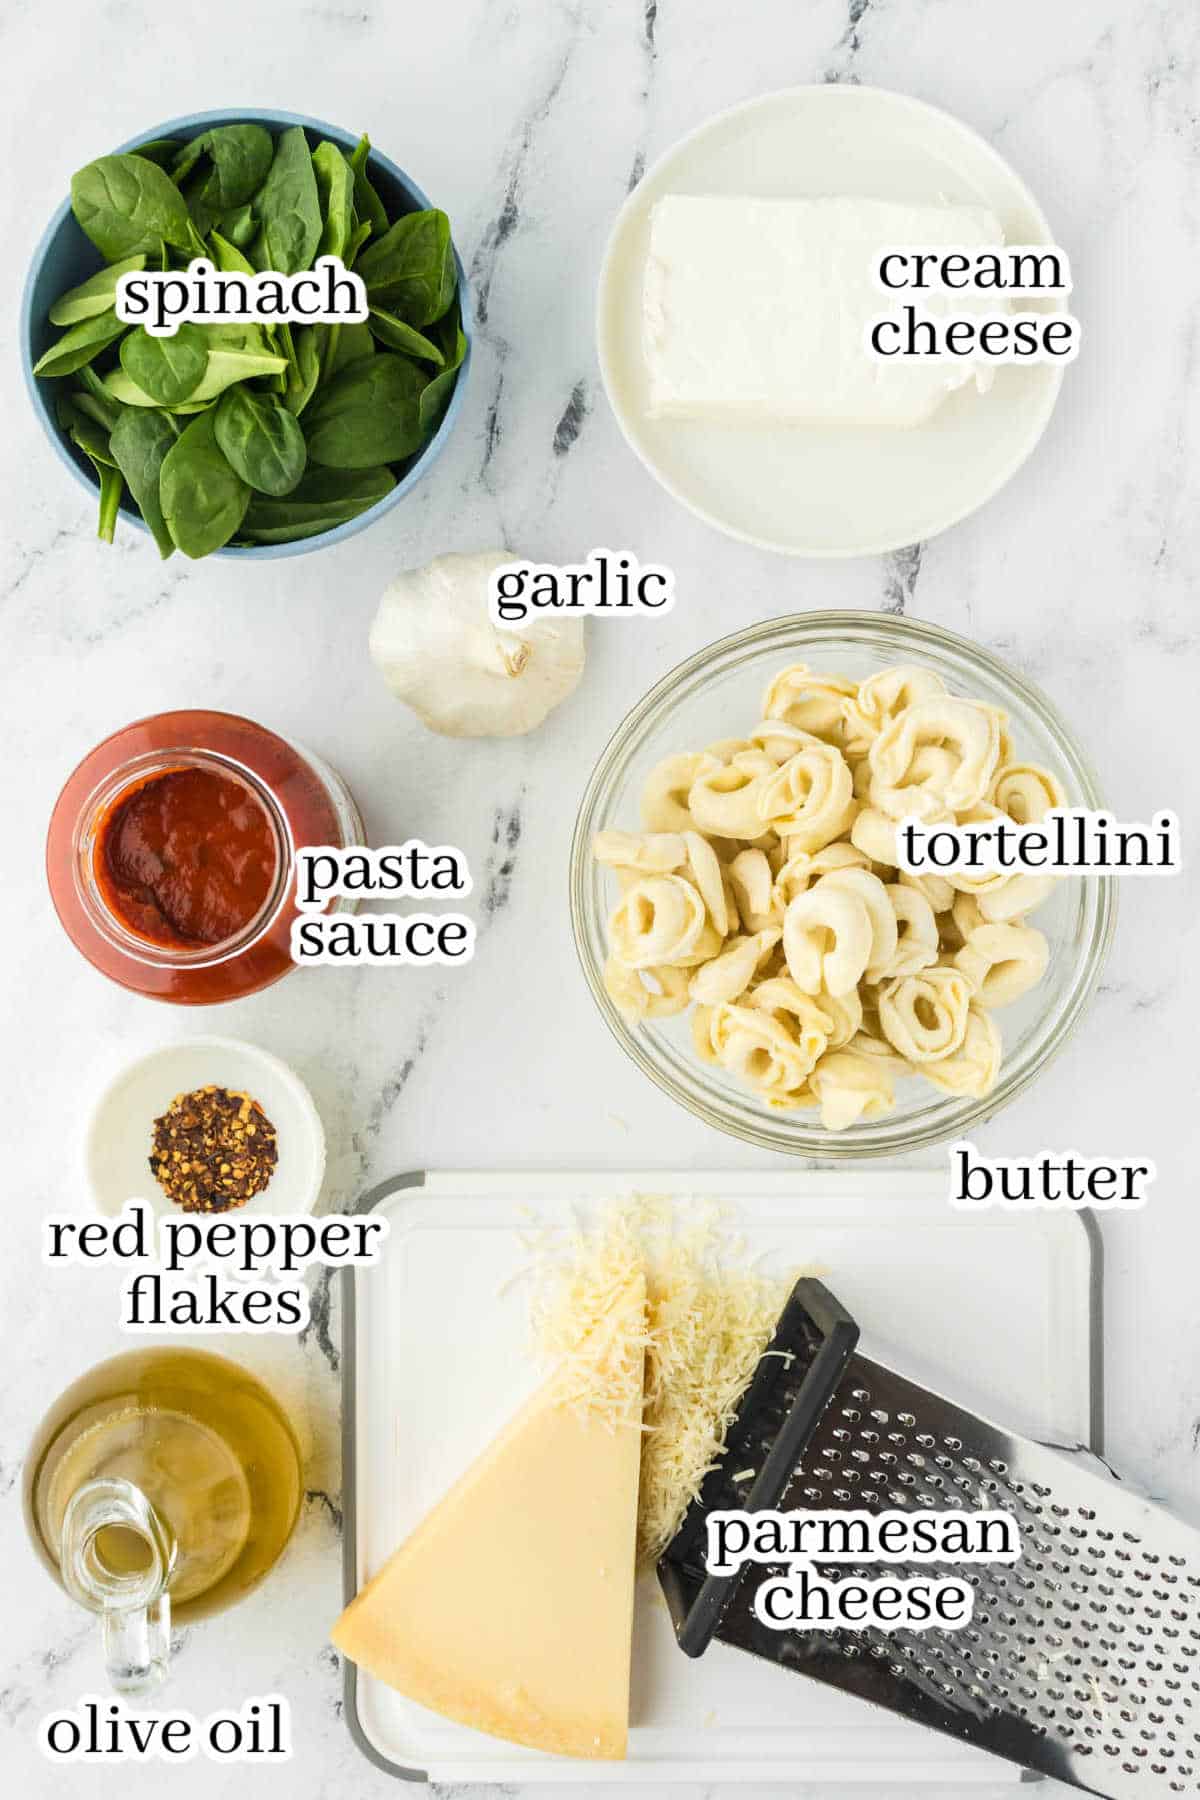 Ingredients to make the pasta recipe, with print overlay for clarification.